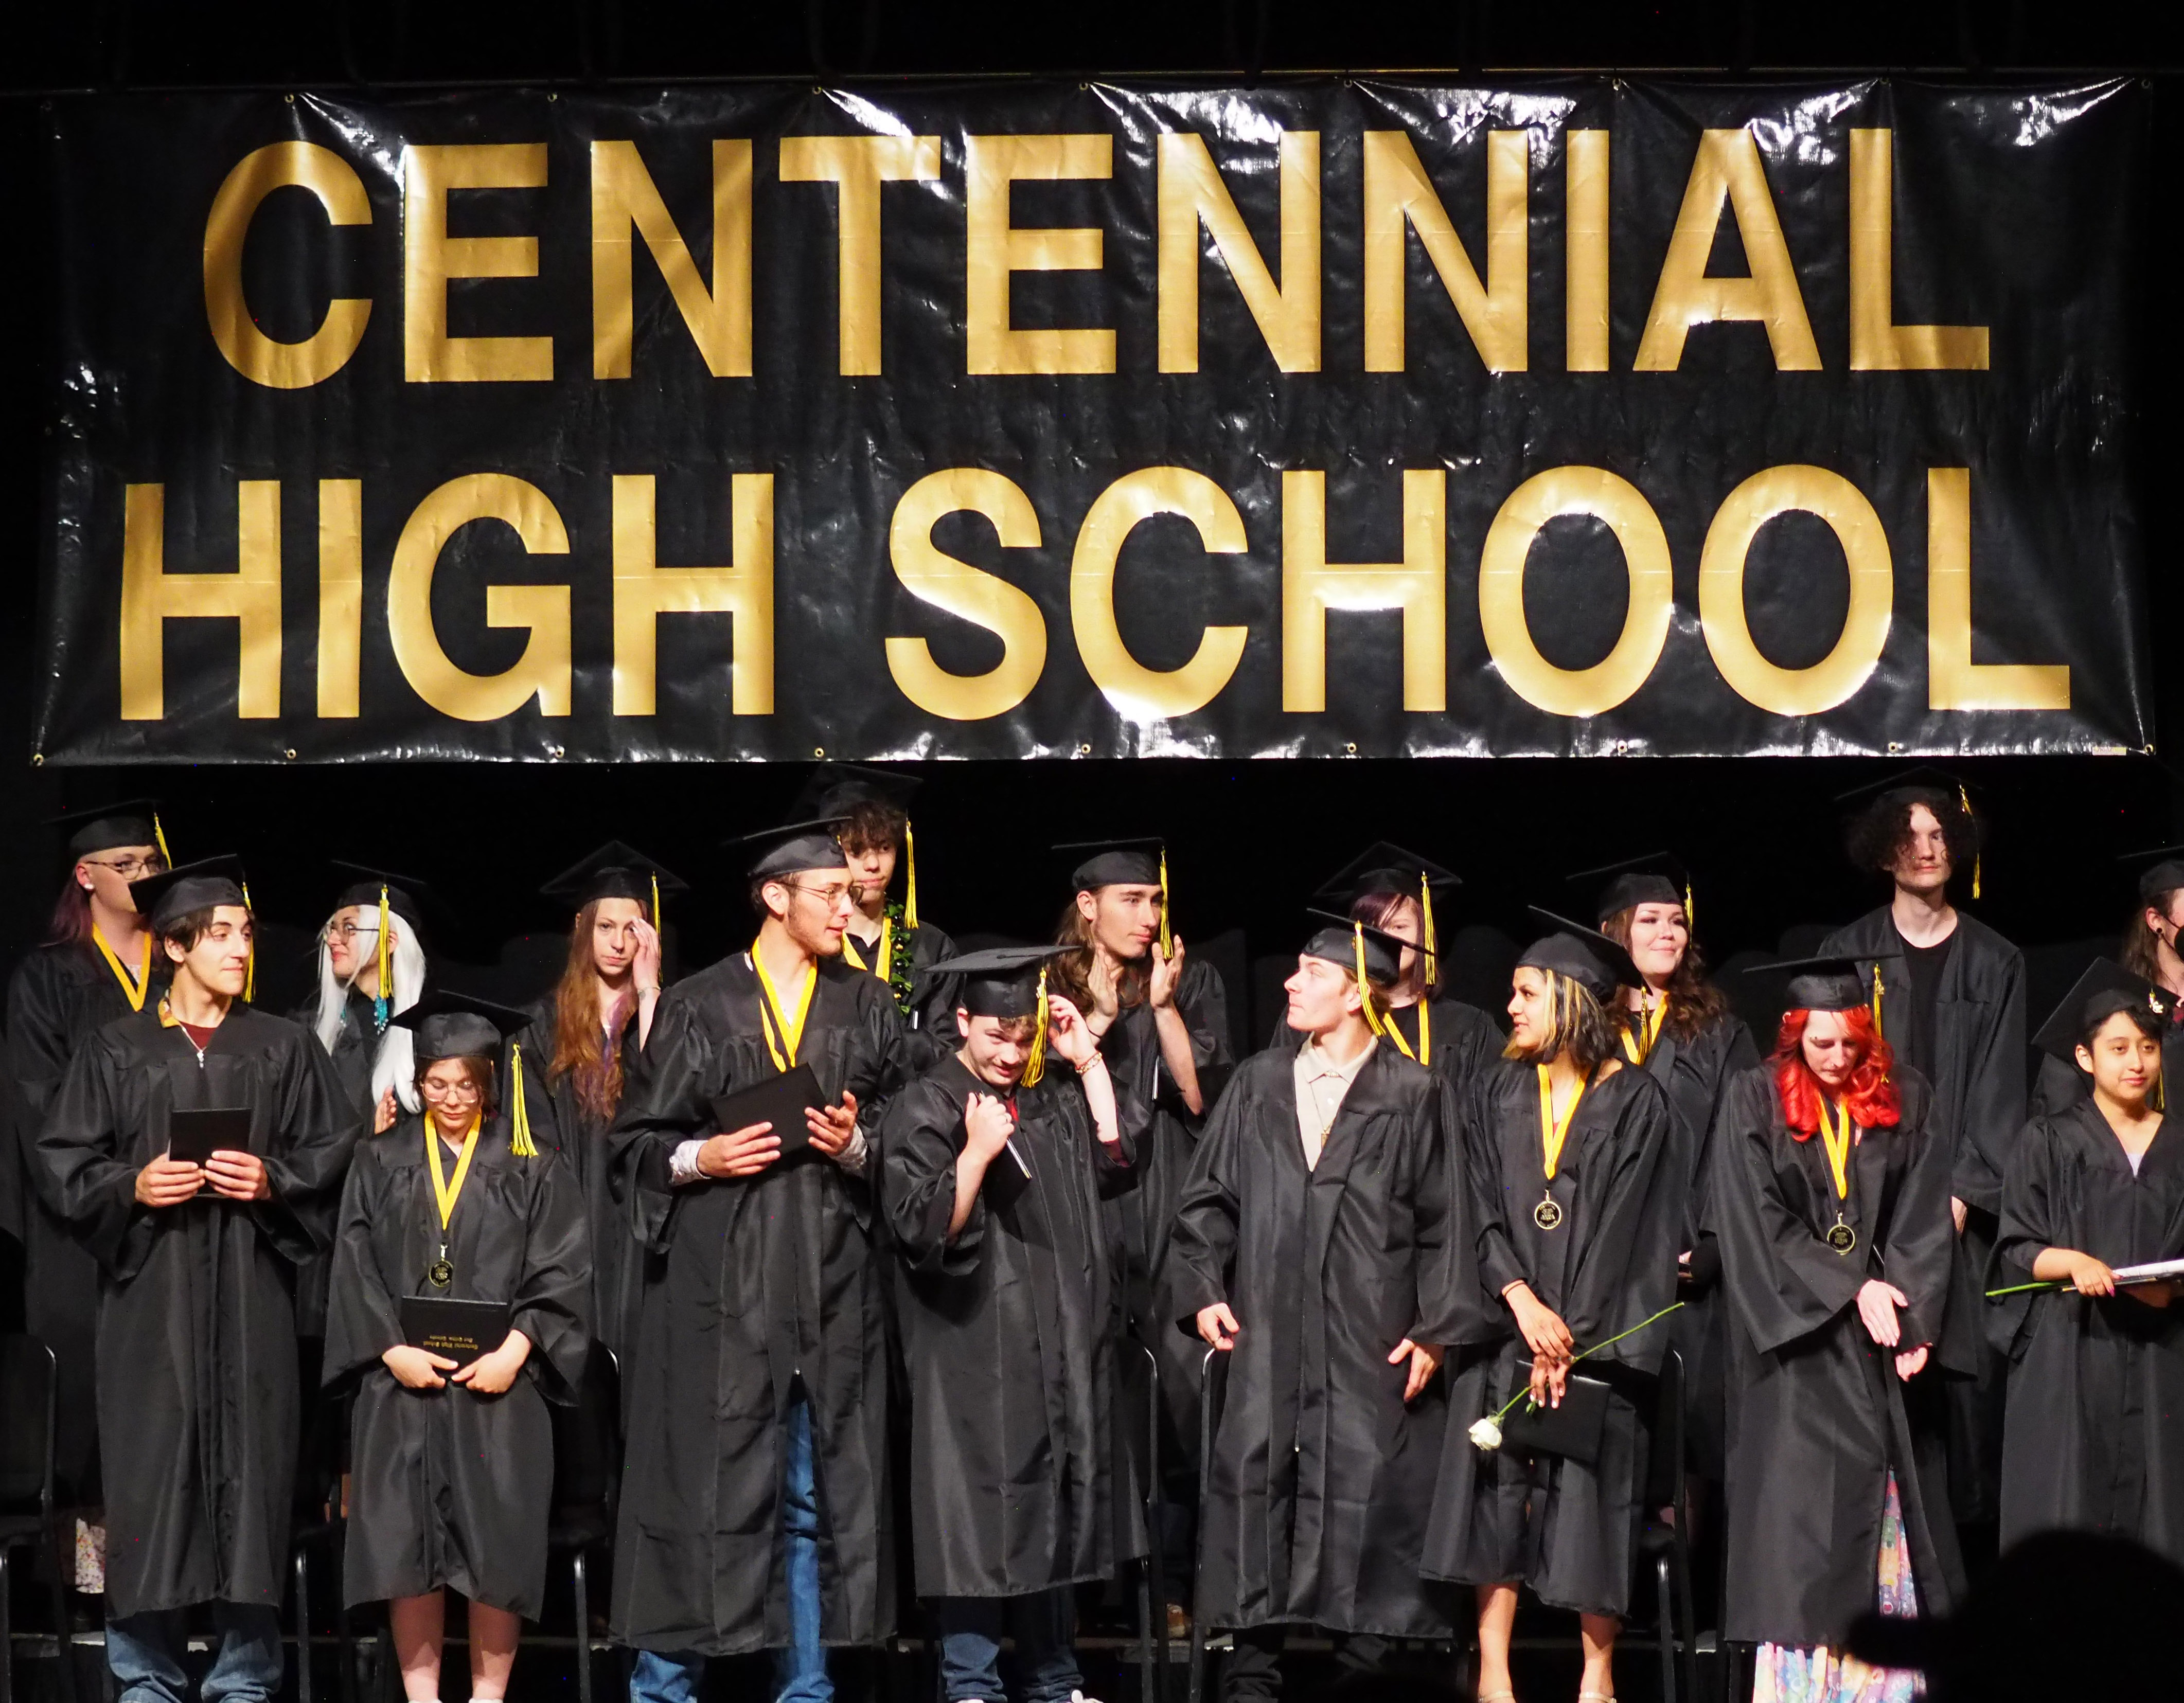 Centennial High School sign with graduates standing on the stage.